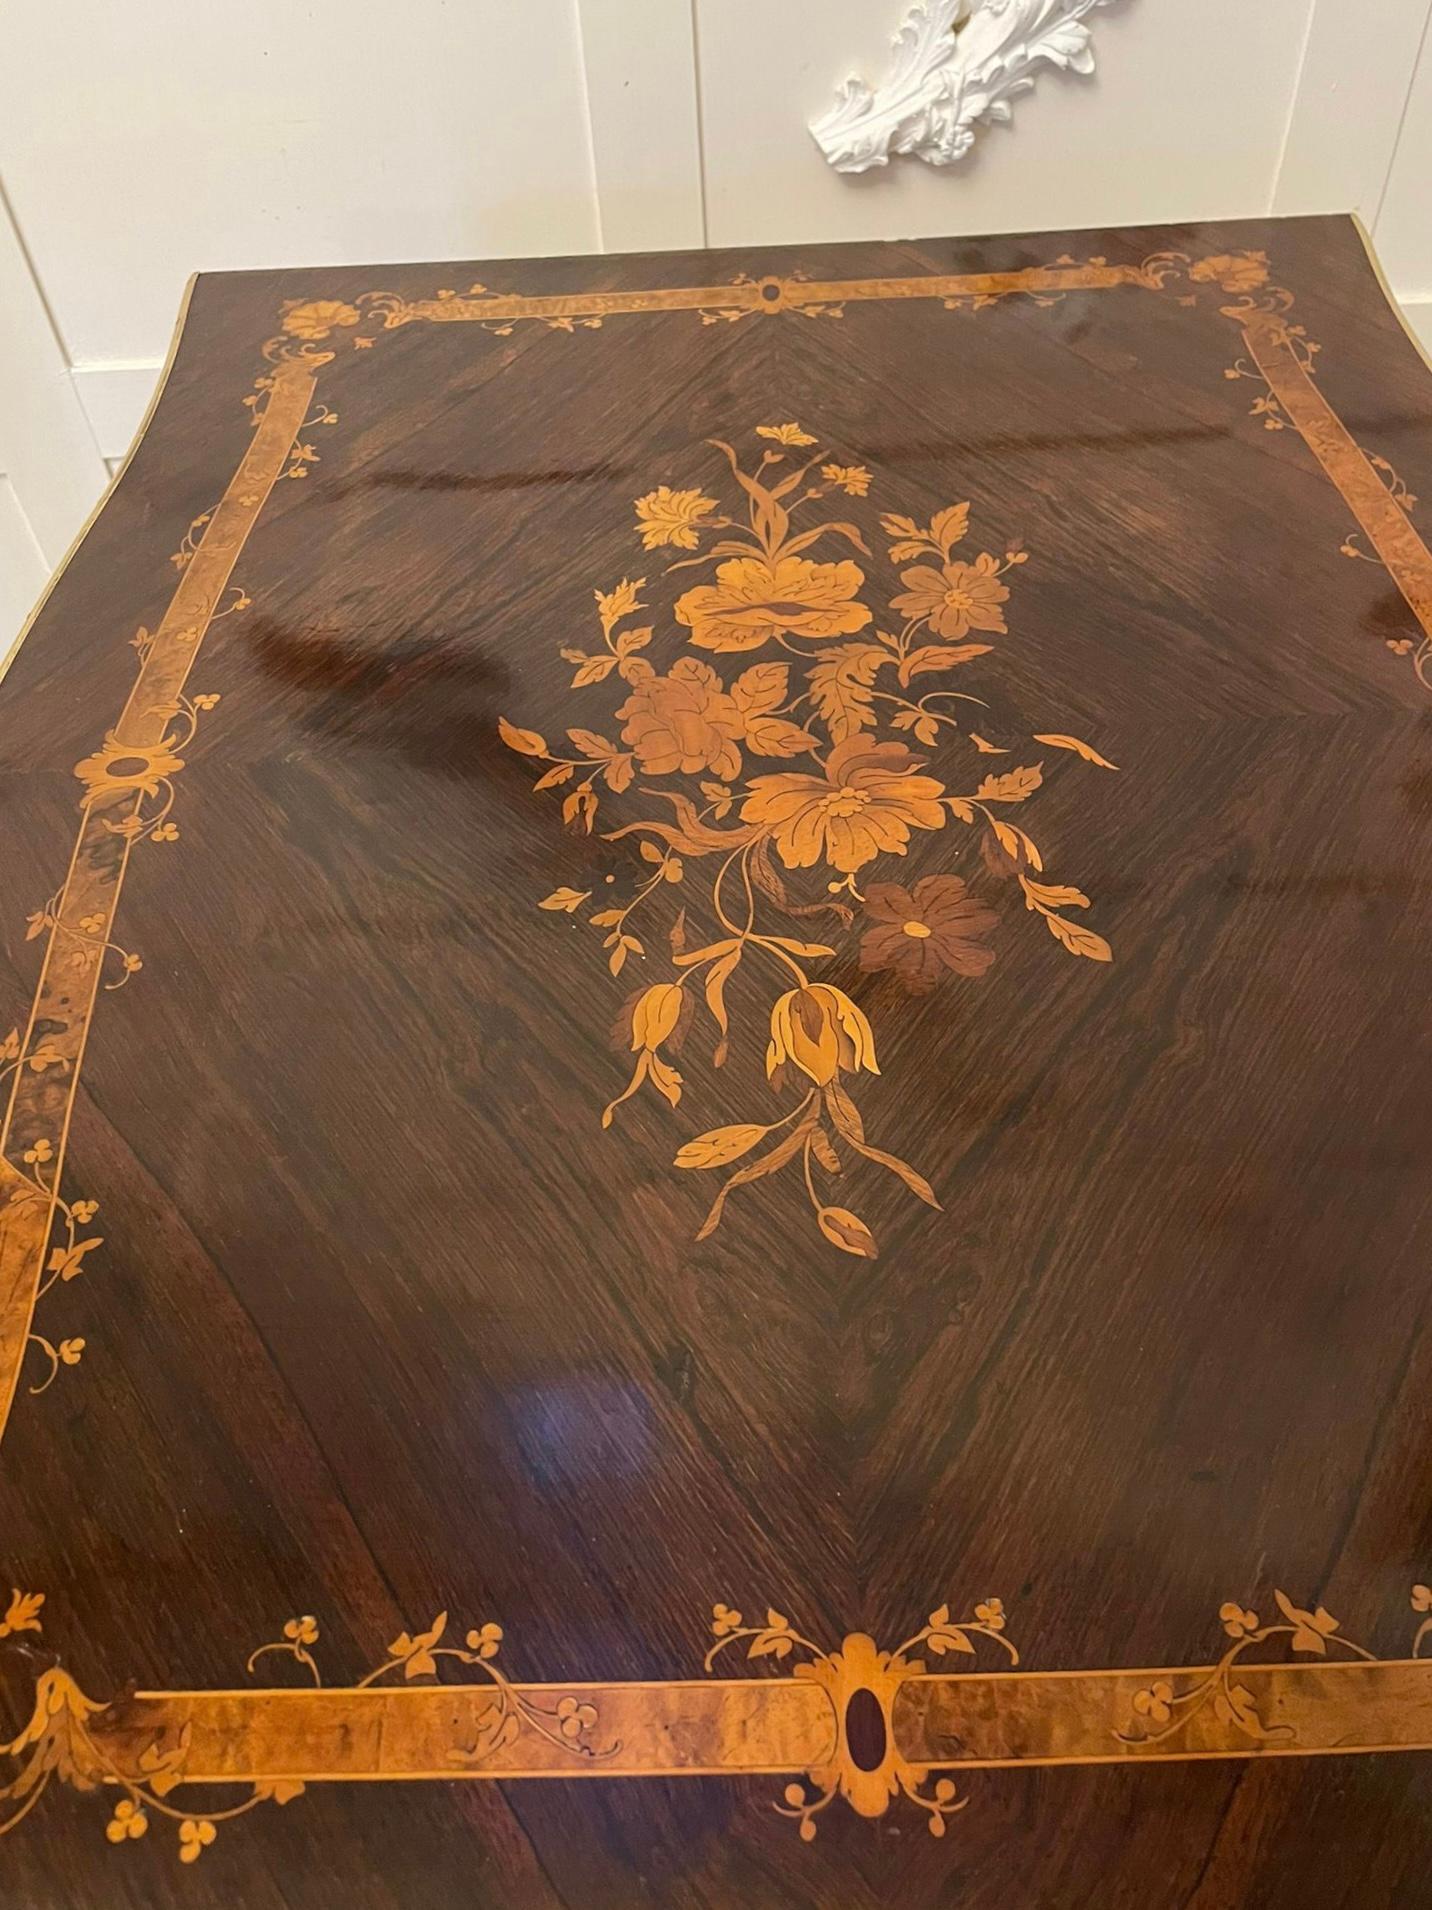 Antique Louis XV quality French rosewood marquetry inlaid freestanding centre table having a fantastic quality rosewood marquetry inlaid shaped top with two drop leaves and a brass edge, one long frieze drawers with marquetry inlaid and standing on